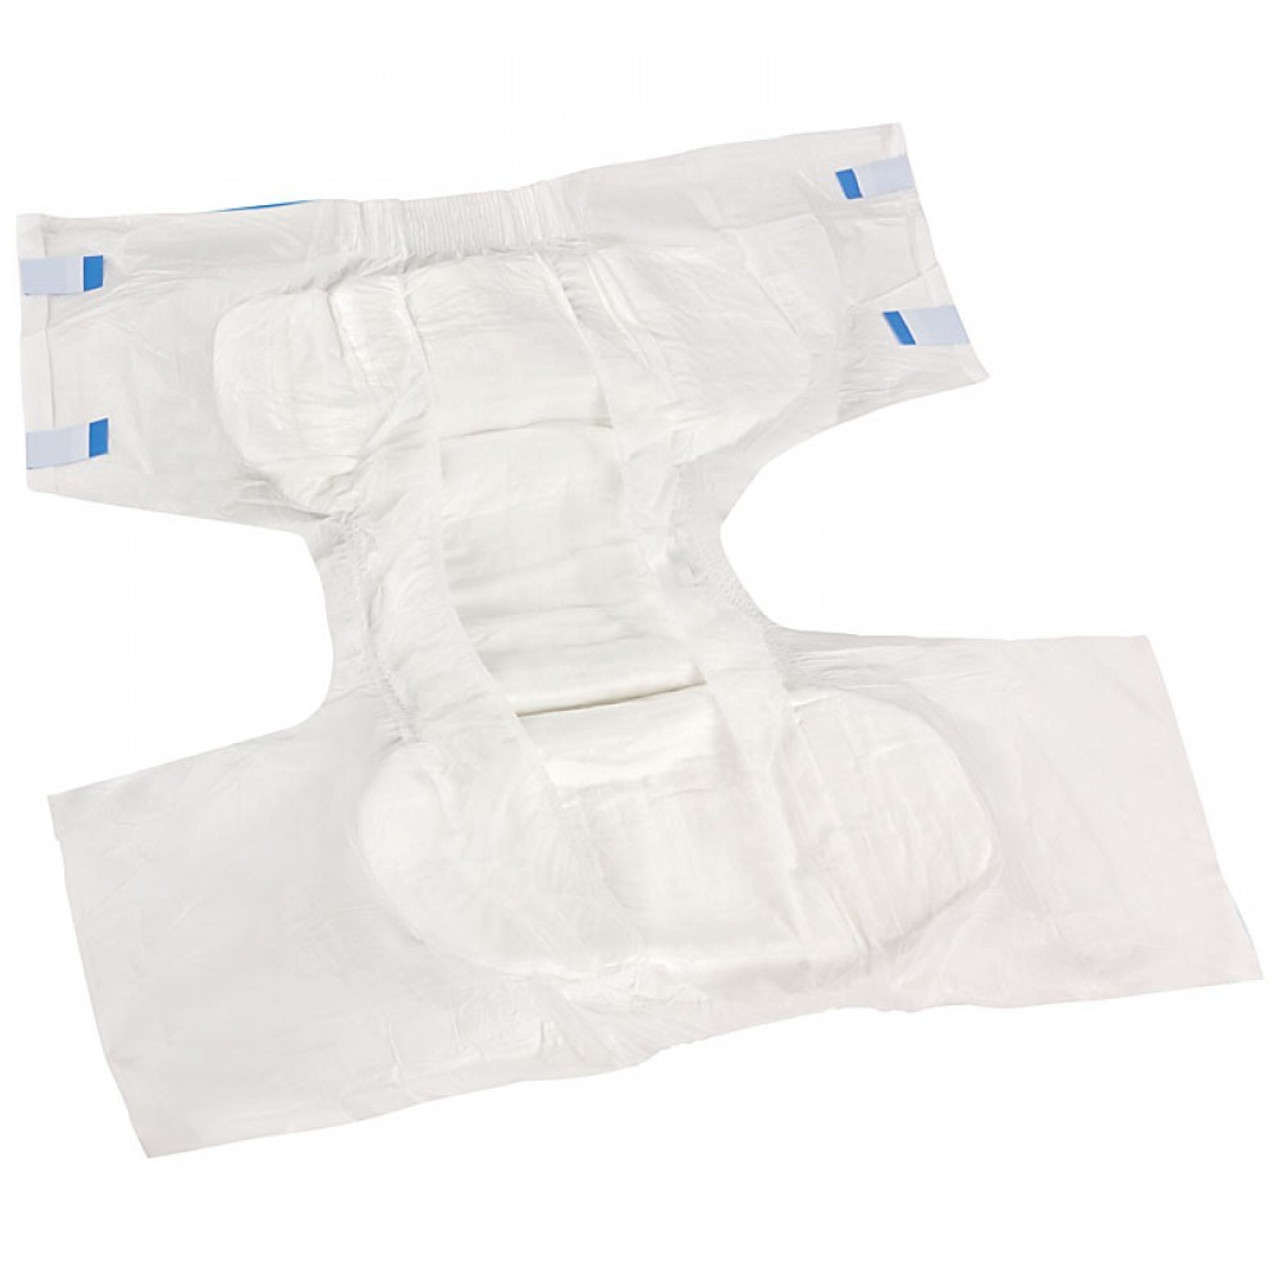 Reusable Incontinence Underwear - Washable Adult Diapers - AgeComfort